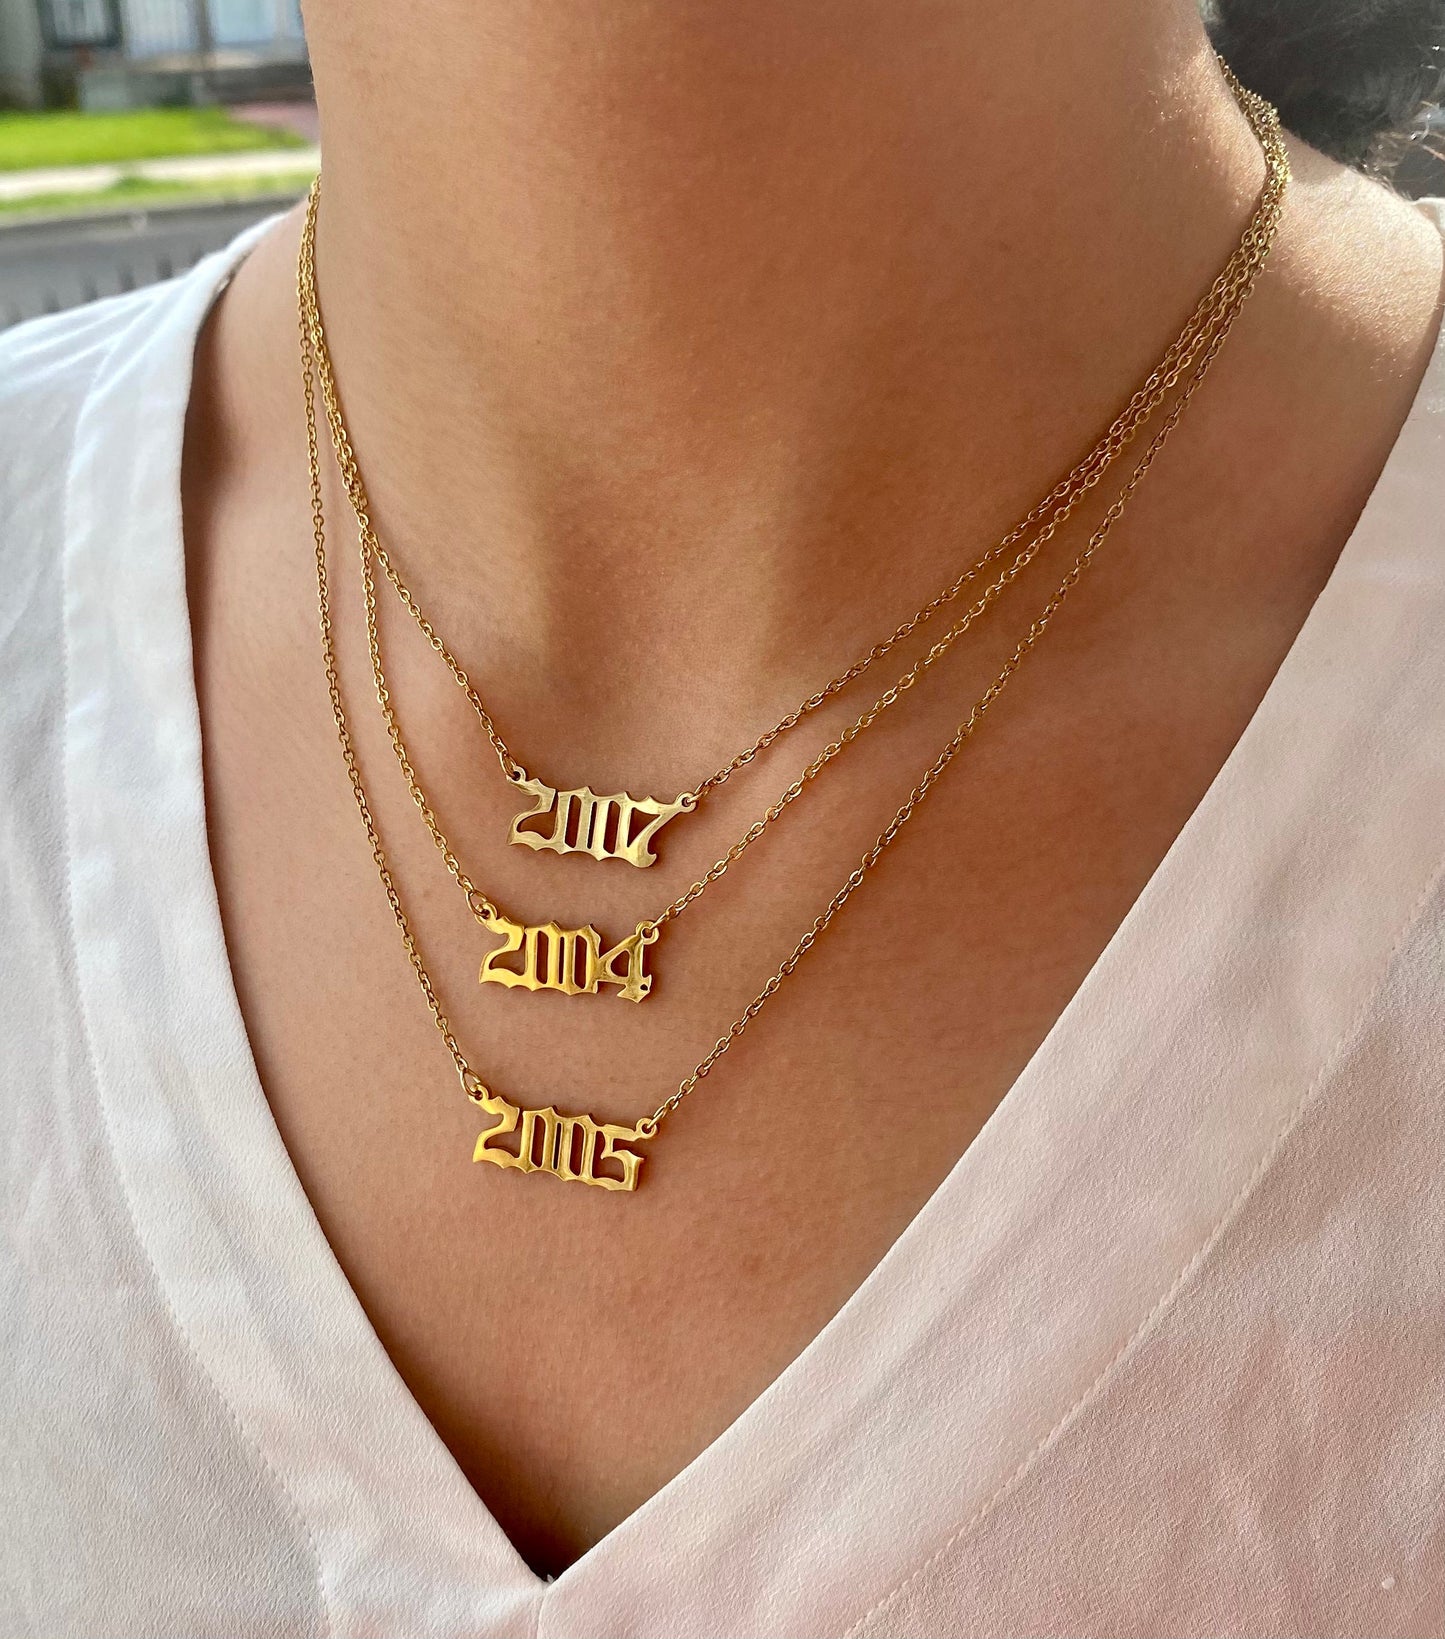 Customized Year birth necklace old English font gold plated from 1991-2010 Cable link chain w/ lobster claw 18"